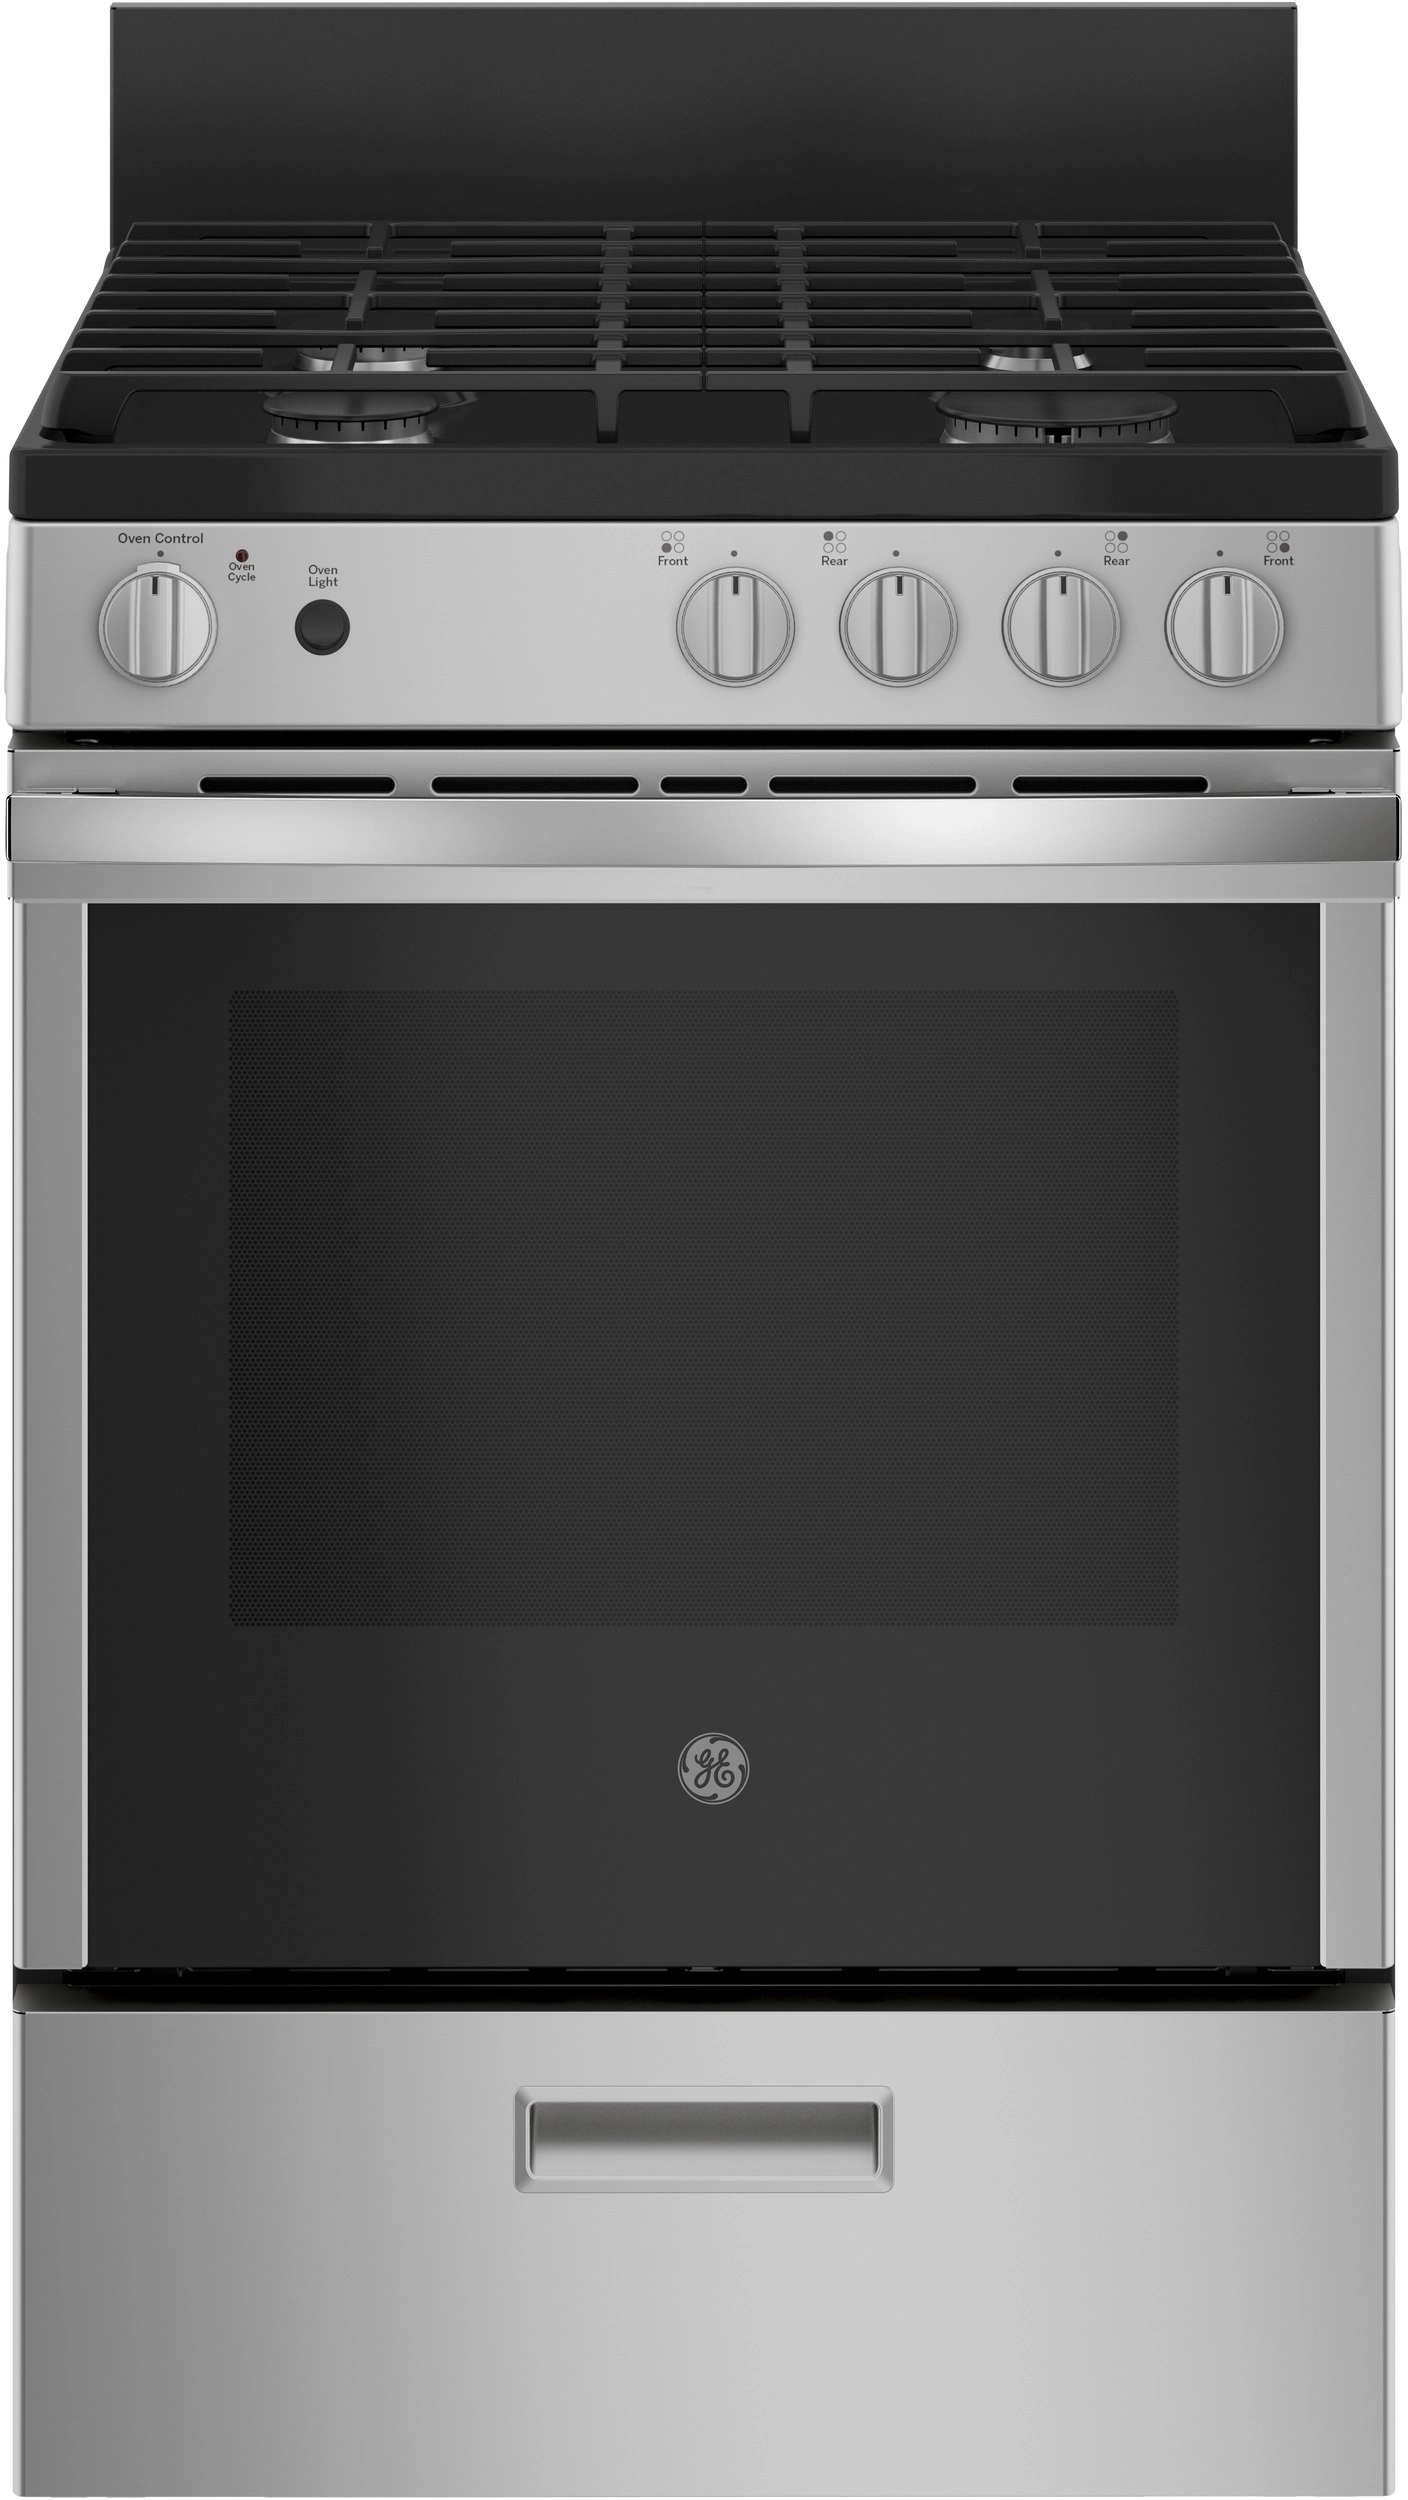 General Electric 24 Inch Freestanding/Slide-in Gas Range with 4 Sealed Cooktop Burners